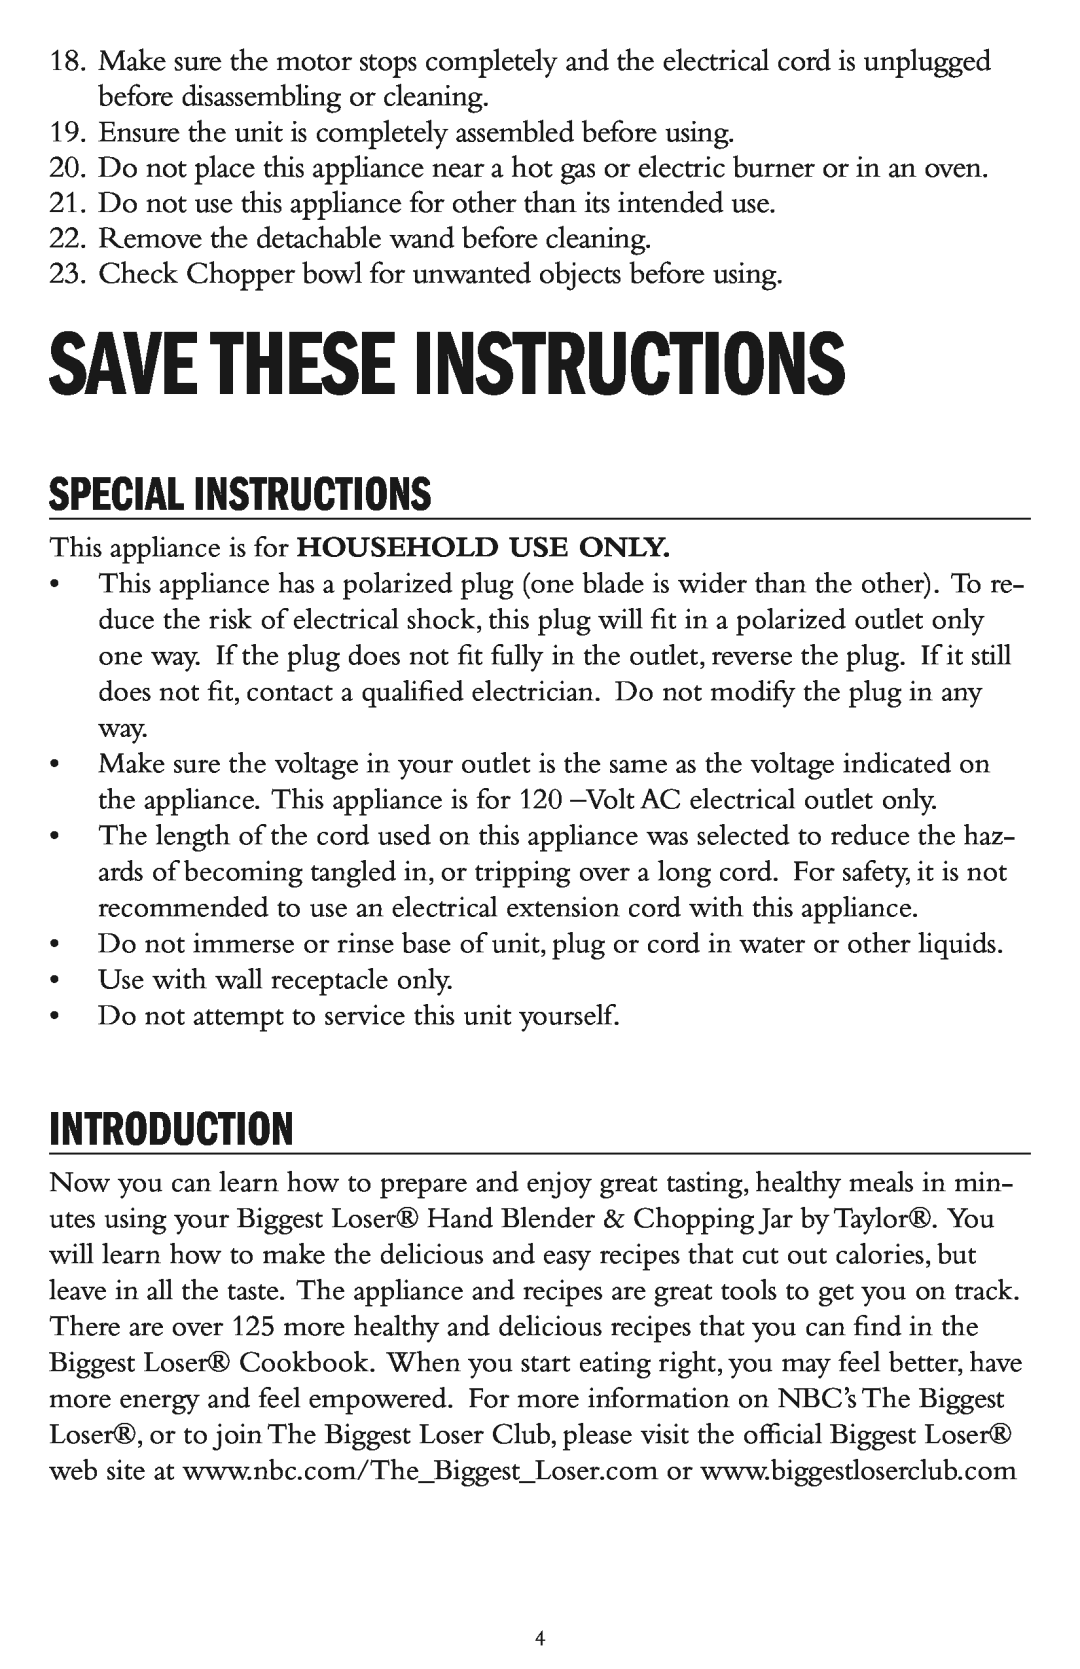 Taylor AB-1001-BL instruction manual Special Instructions, Introduction, Save These Instructions 